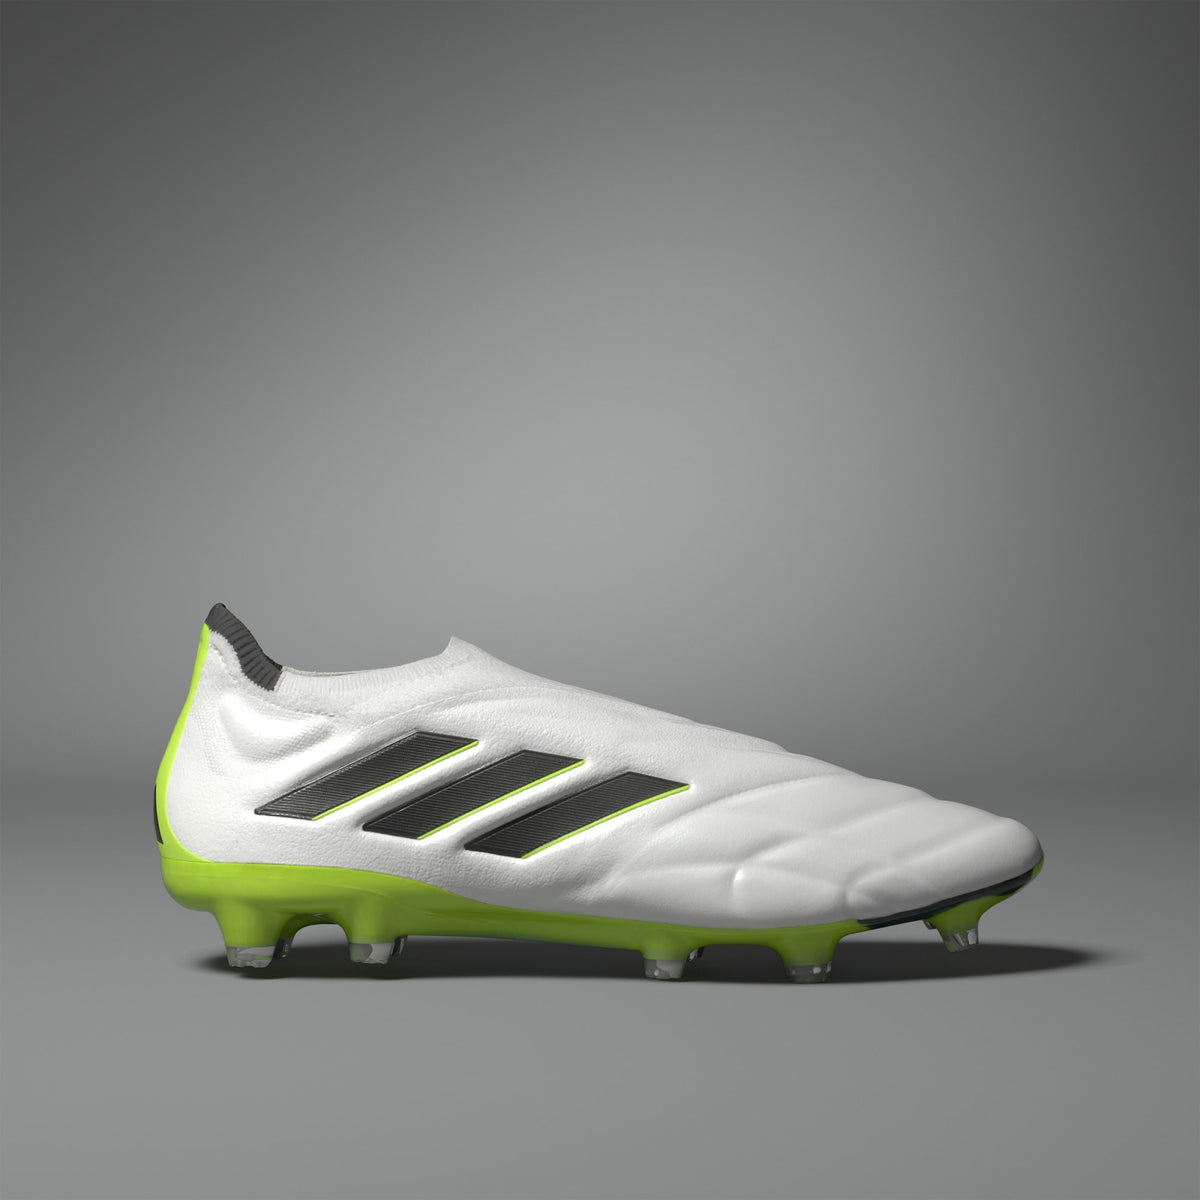 ADIDAS COPA PURE II+ FIRM GROUND SOCCER CLEATS - Niky's Sports